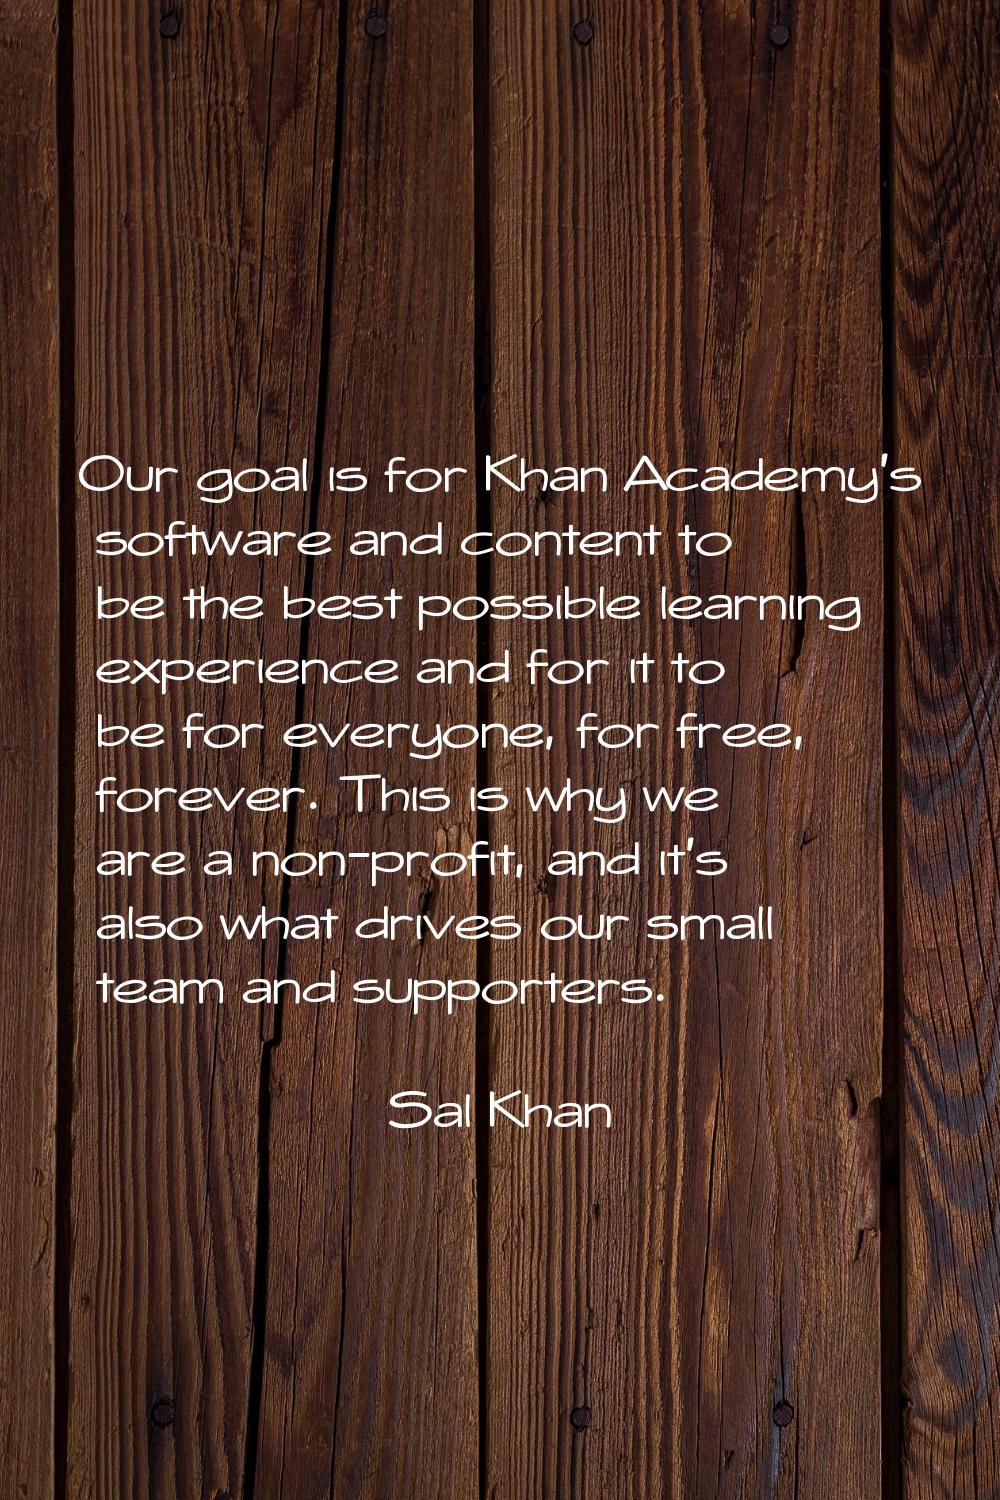 Our goal is for Khan Academy's software and content to be the best possible learning experience and